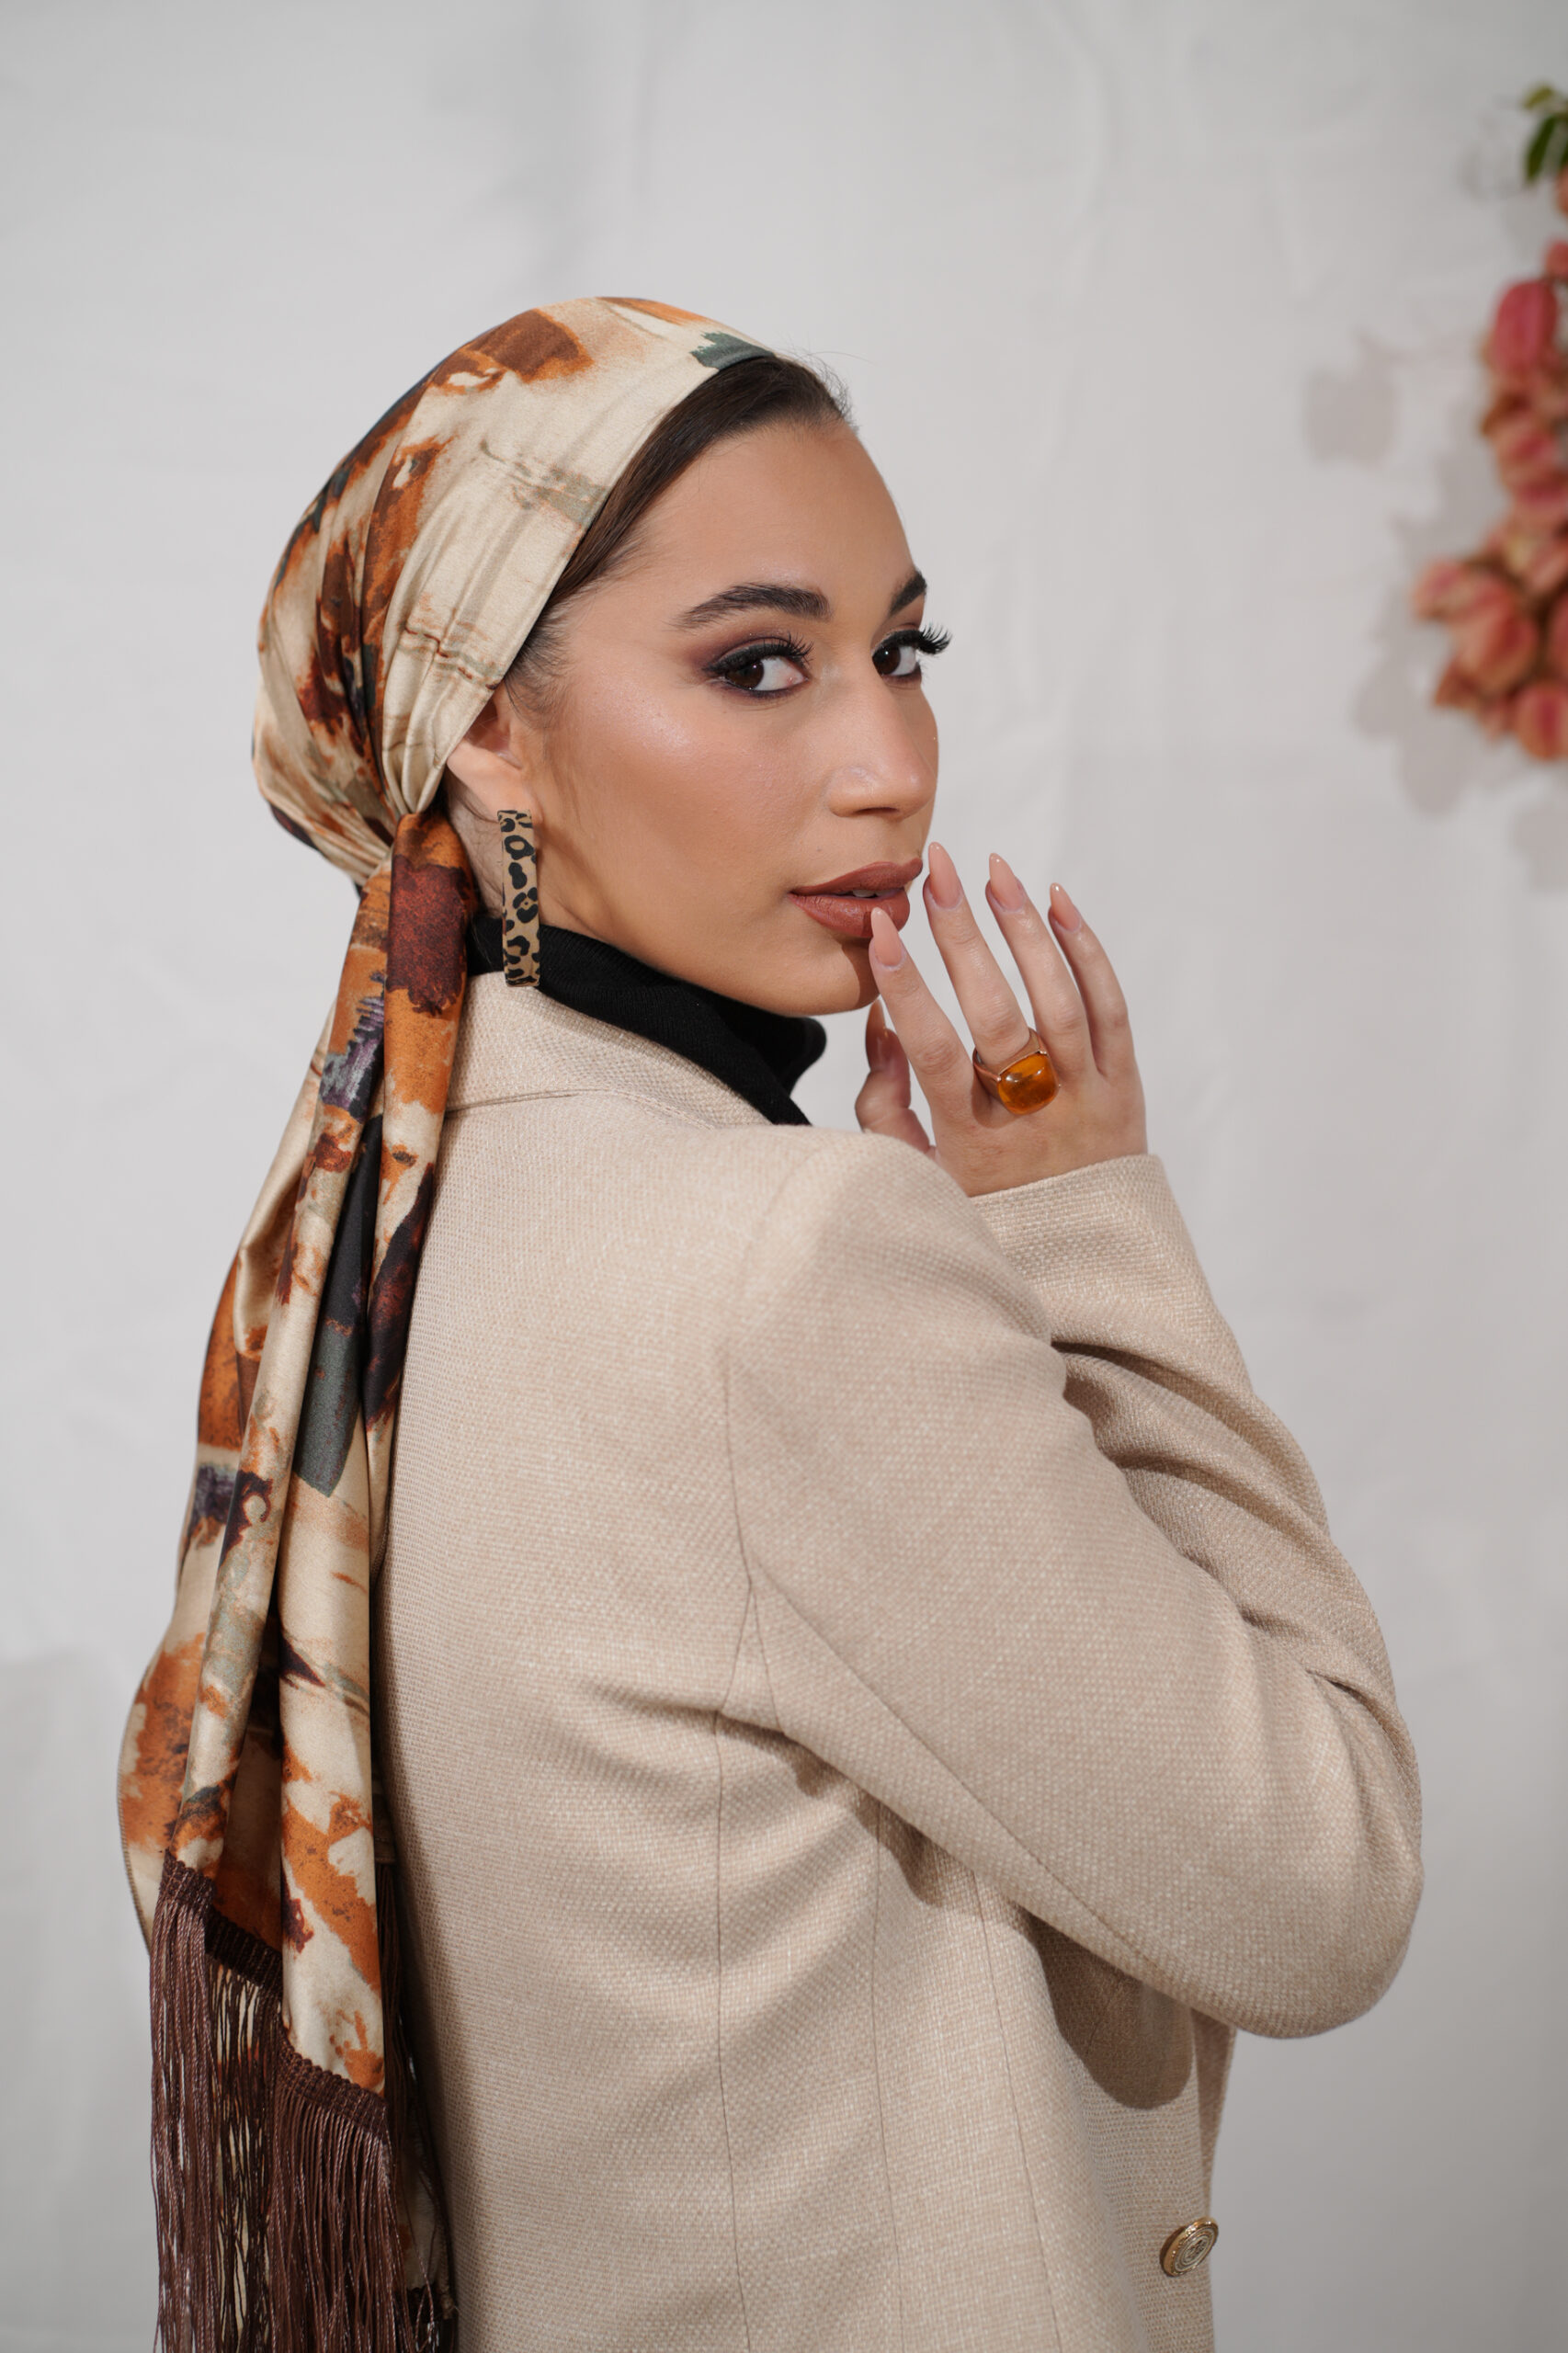 Printed Beige and Brown Headscarf with Fringes